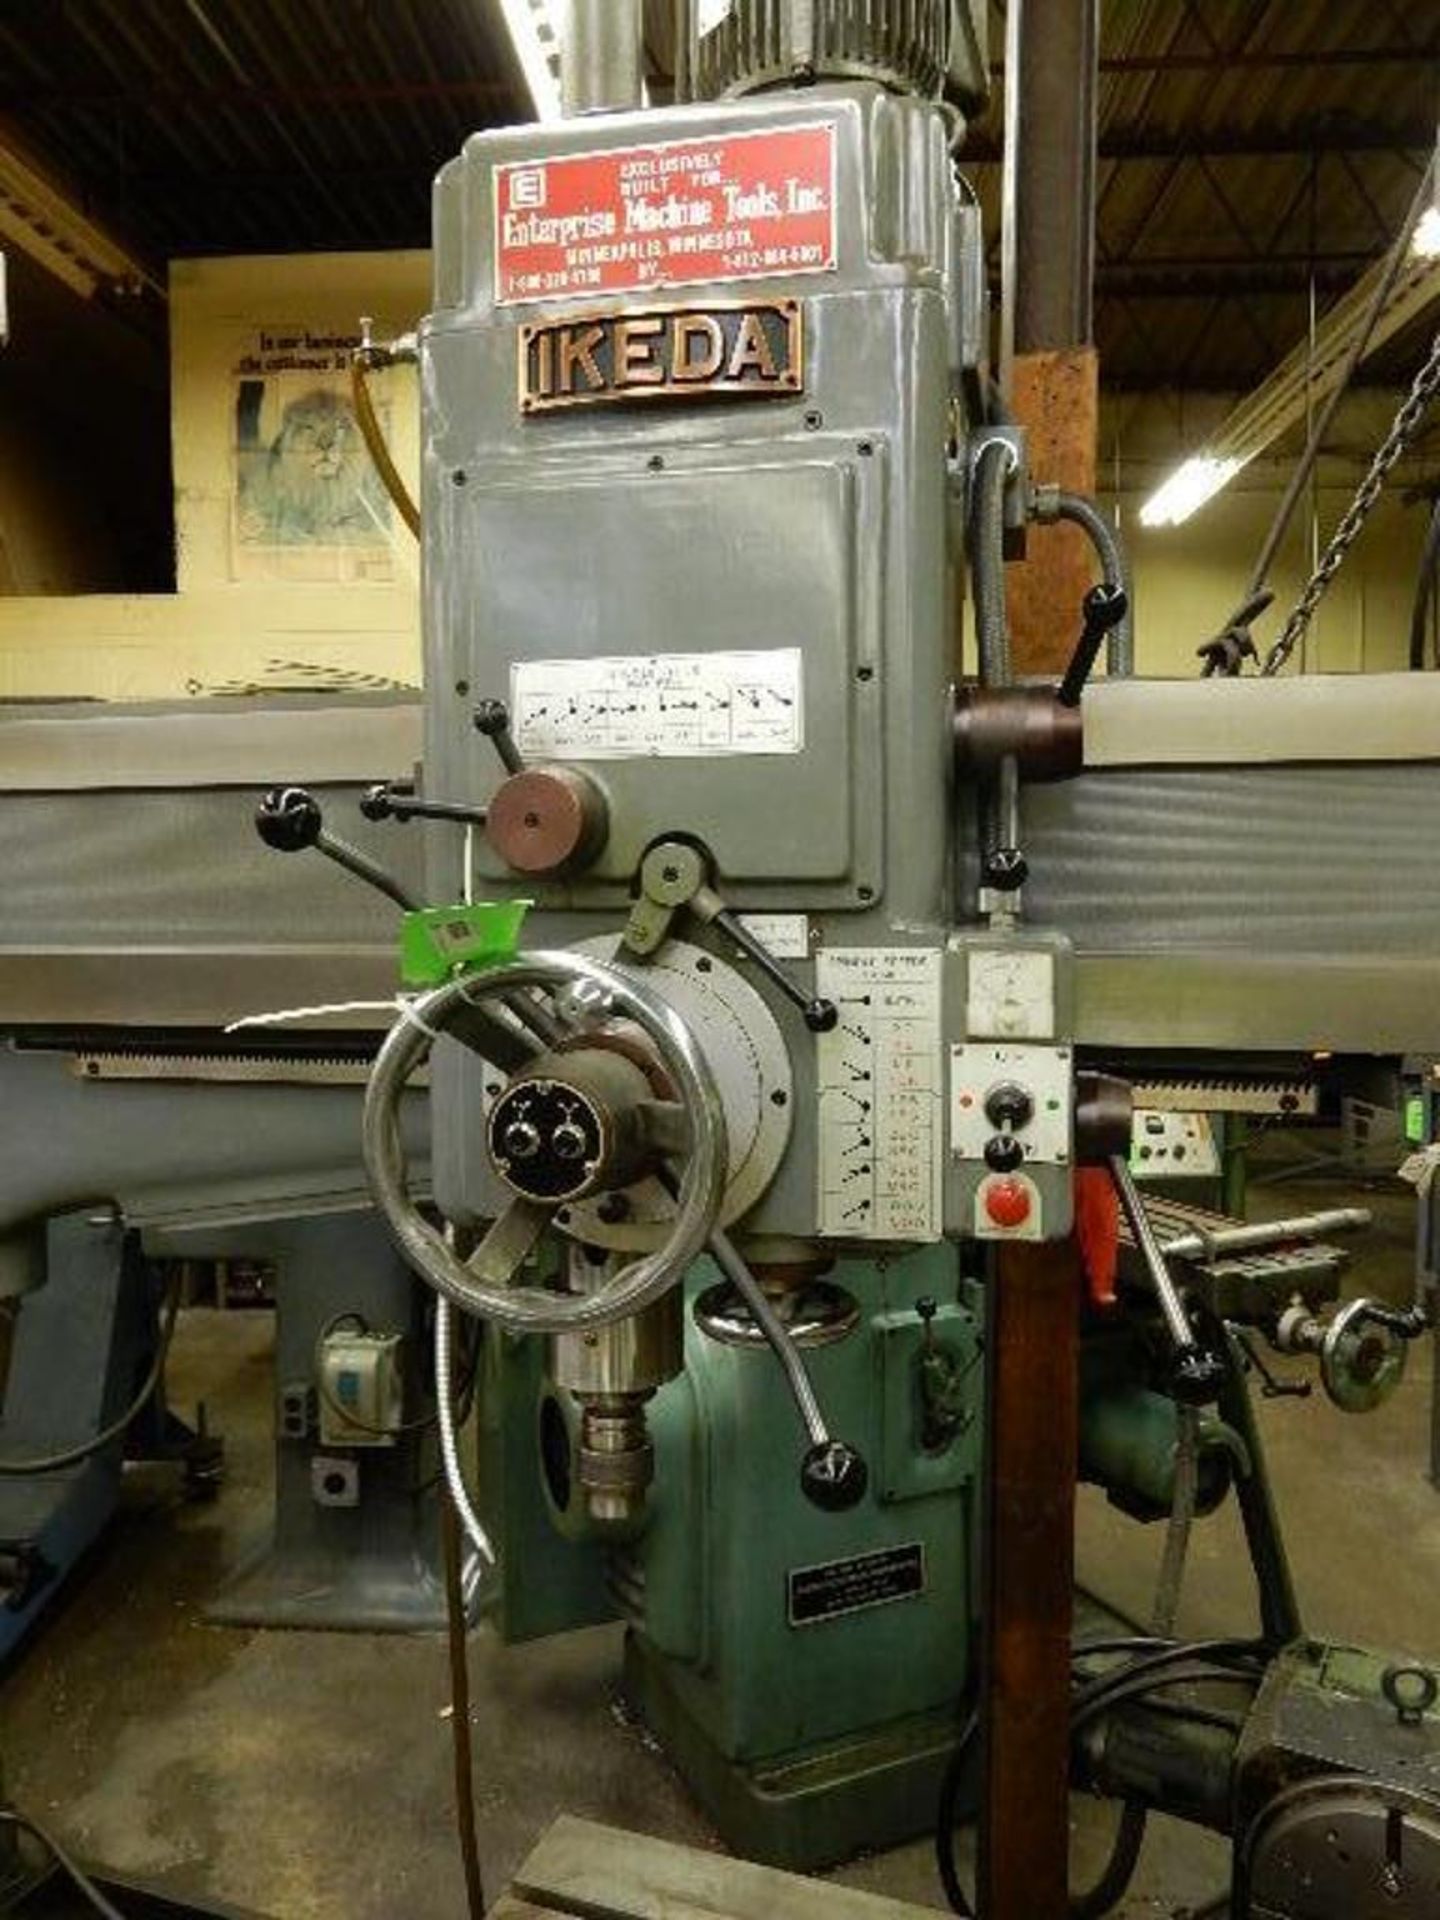 Ikeda Model RM-1375 Radial Arm Drill, 13" Column, 5' Arm, 30-1500 RPM Spindle Speeds, 26.5" - Image 18 of 27